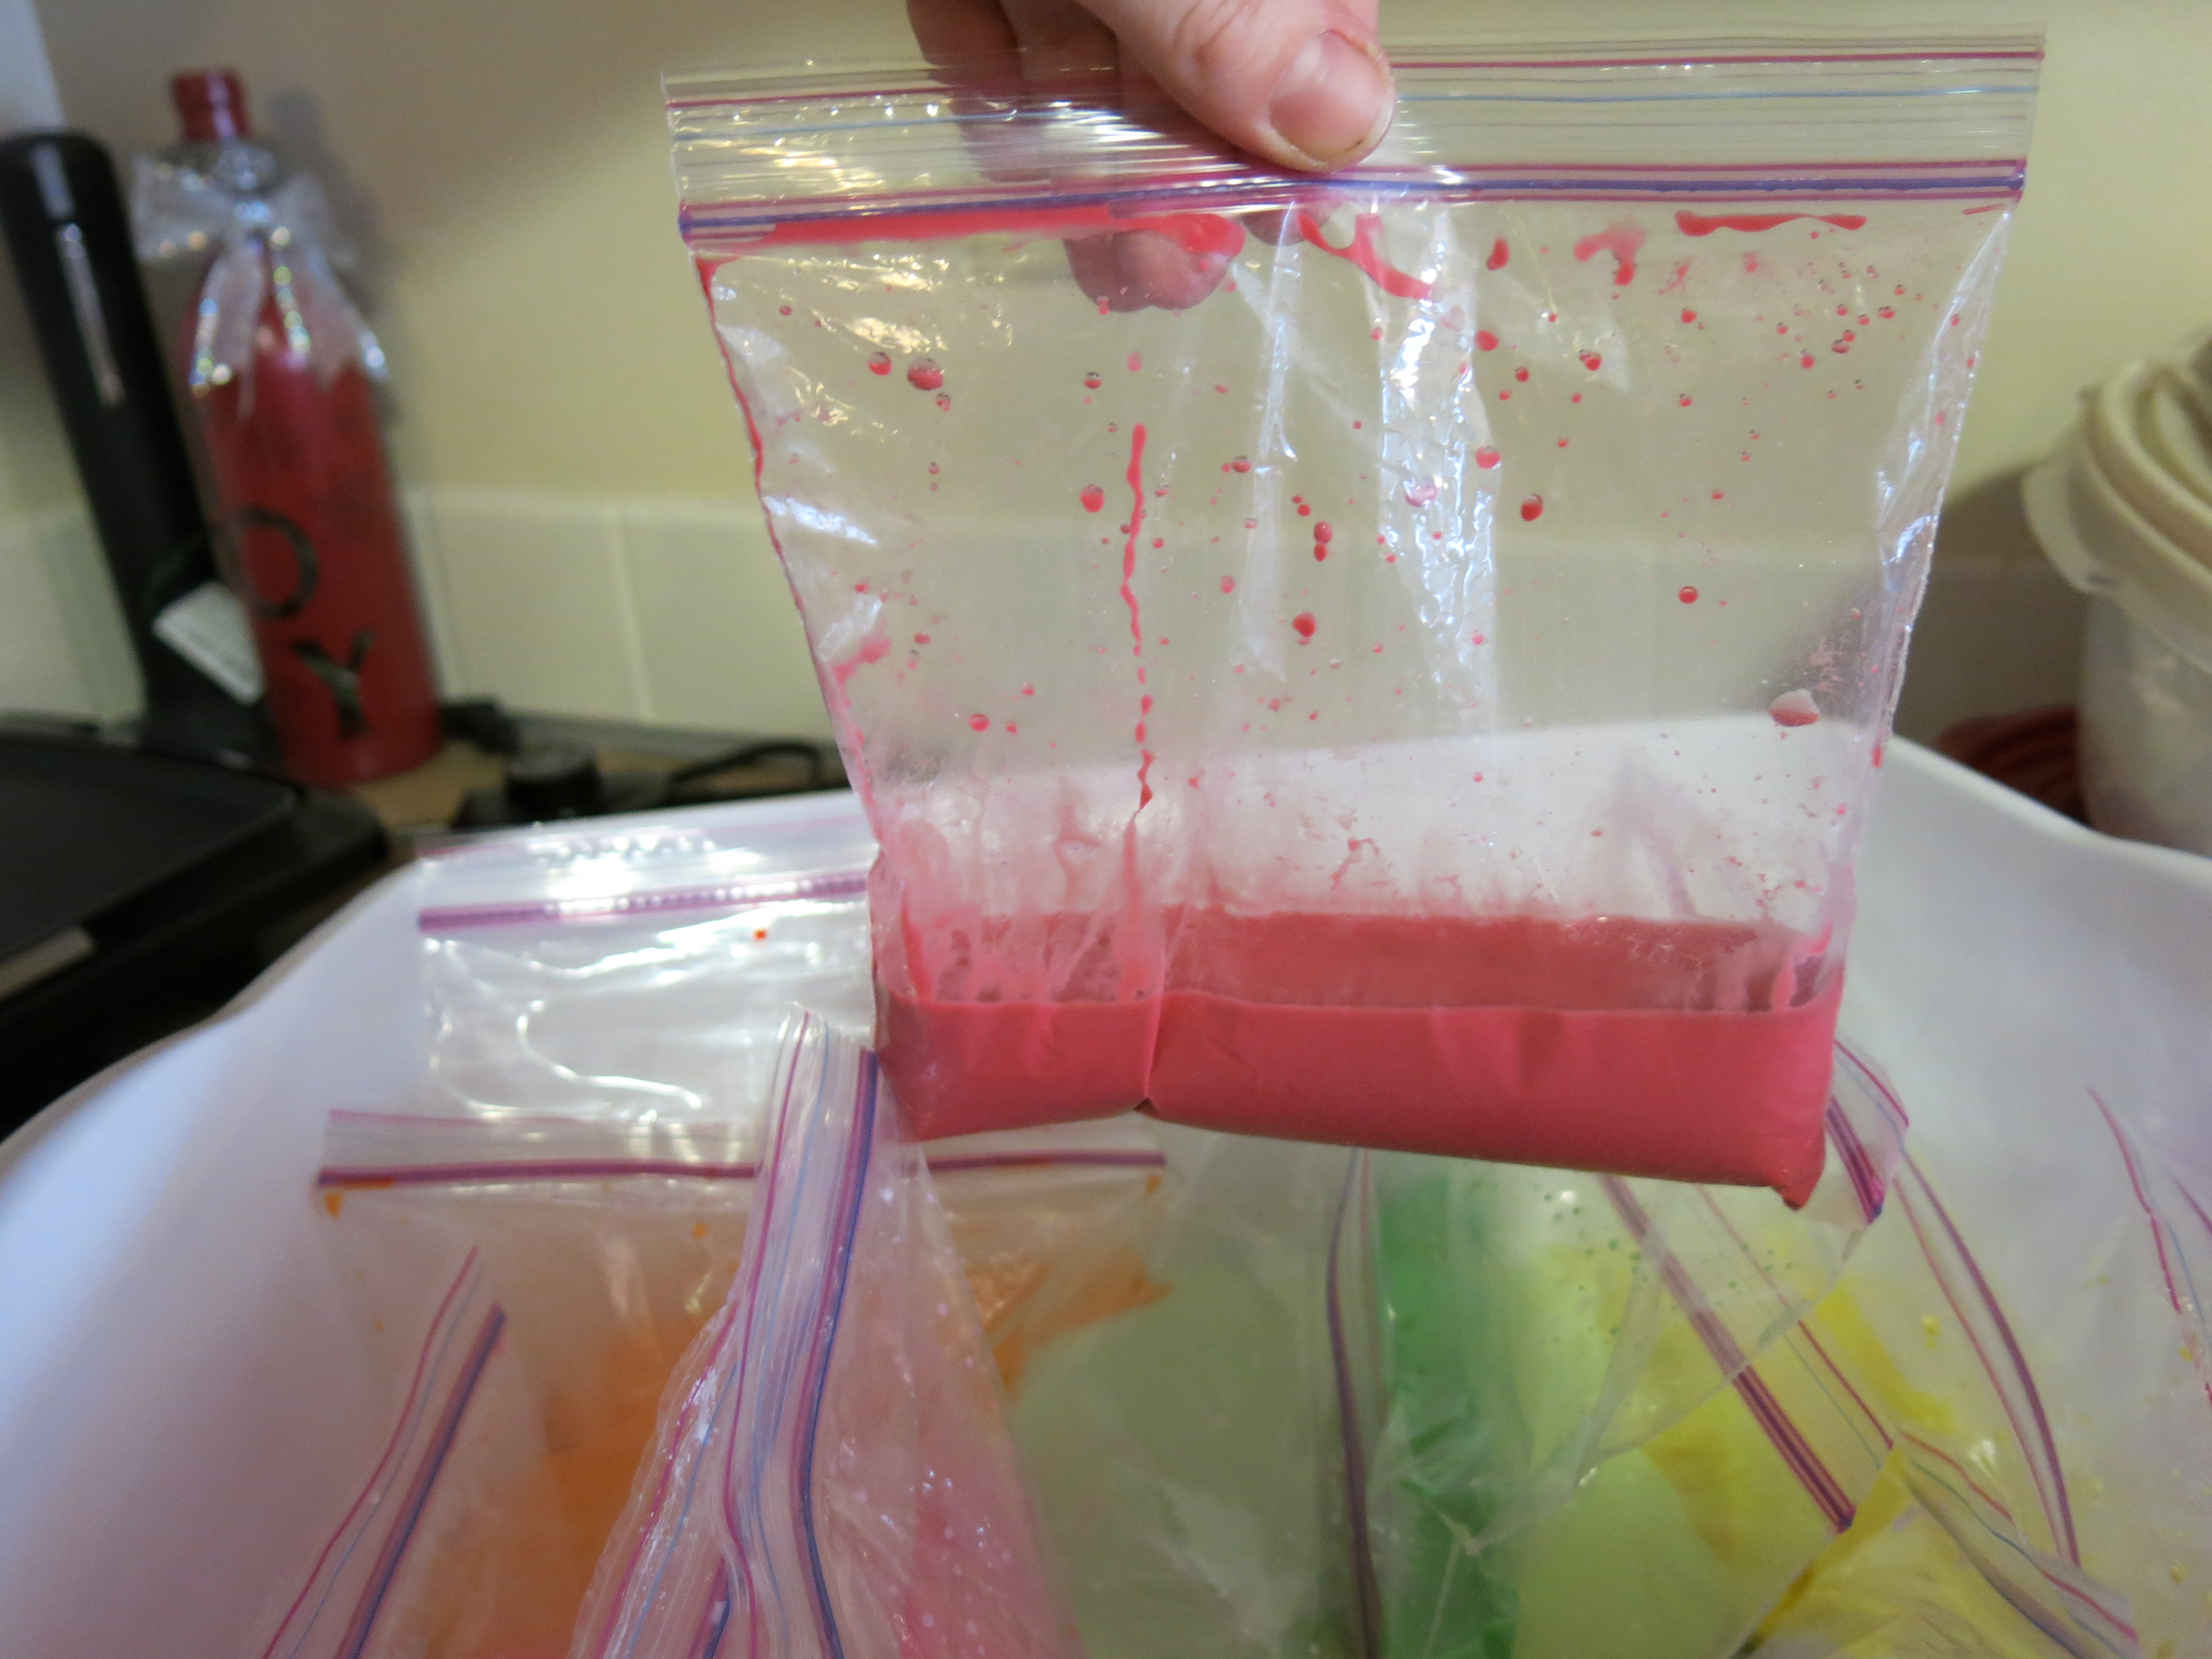 Santa Claus Exploding Baggie Science Experiment • The Science Kiddo